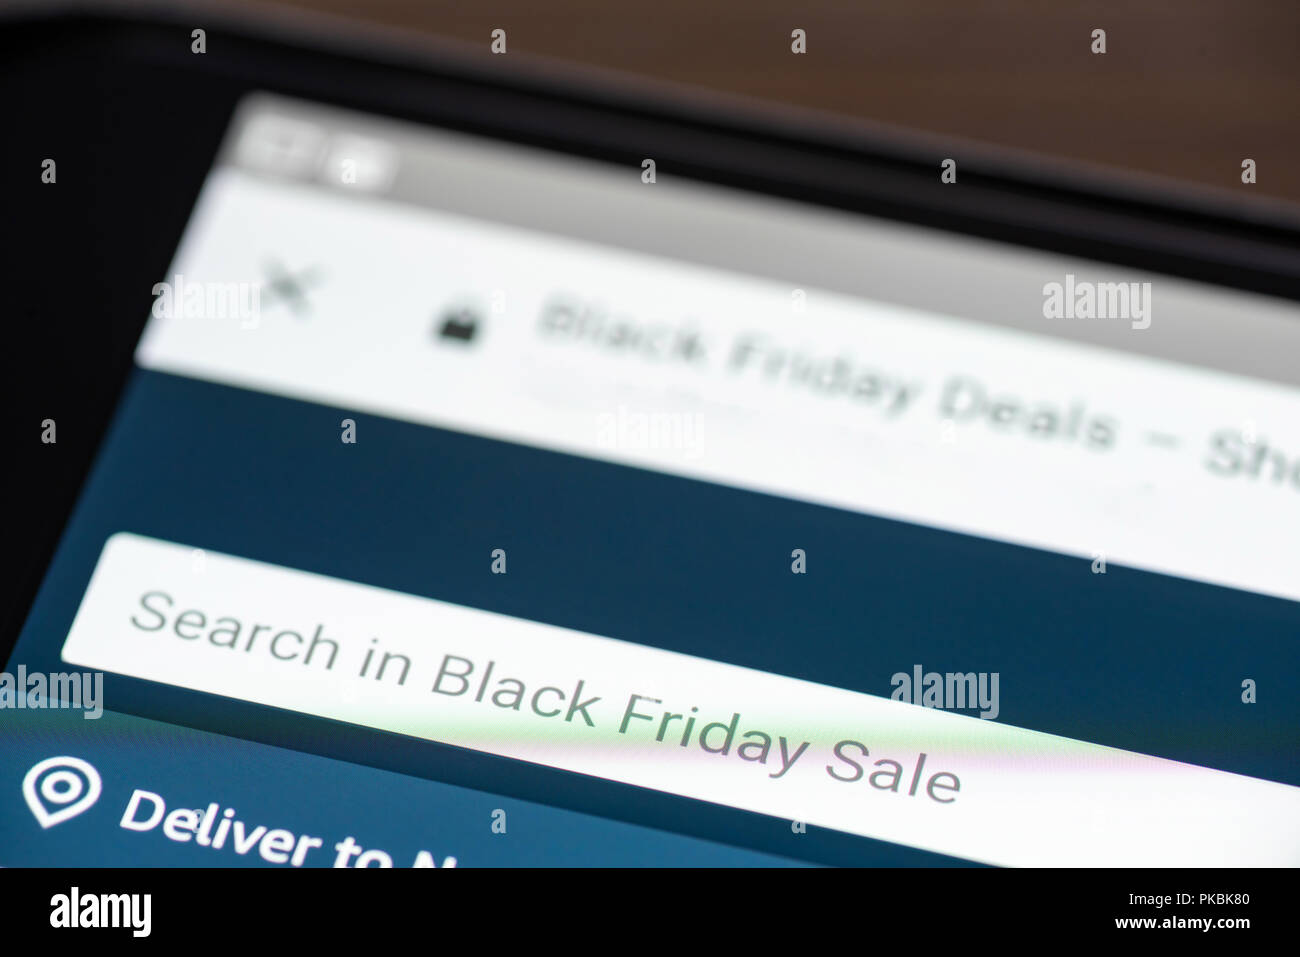 Black Friday Sales - Search Shopping